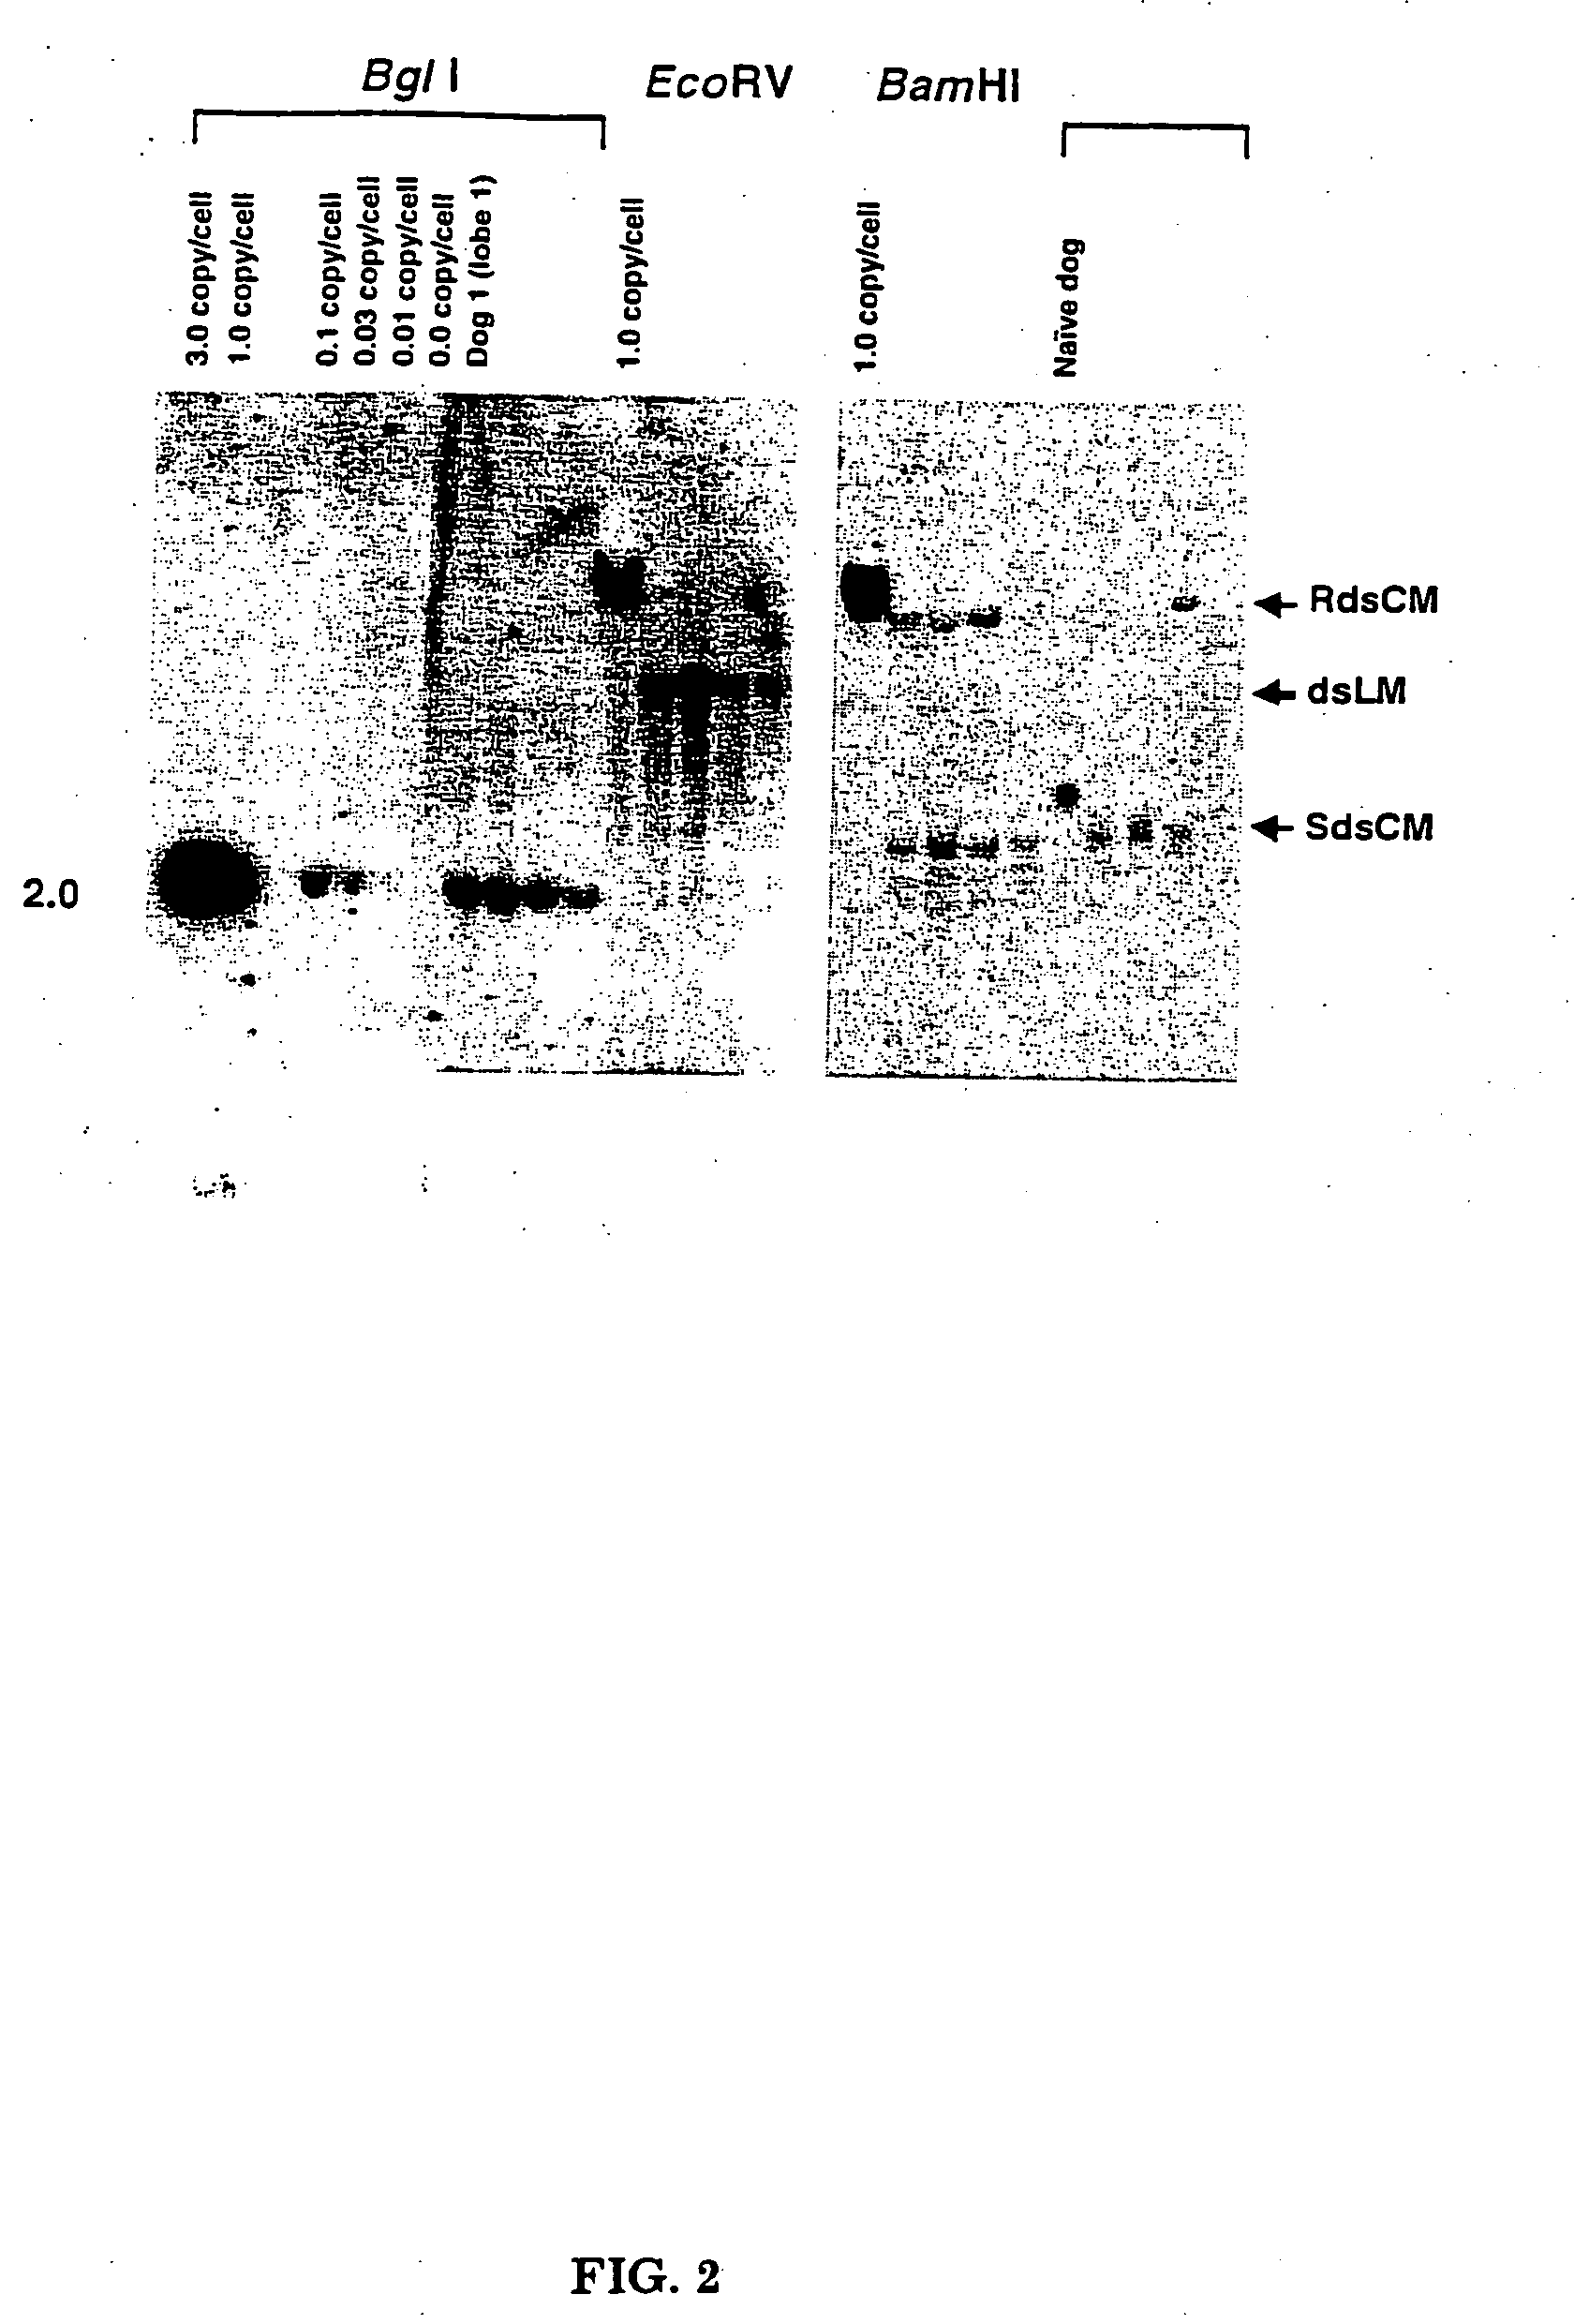 Methods for delivering recombinant adeno-associated virus virions to the liver of a mammal